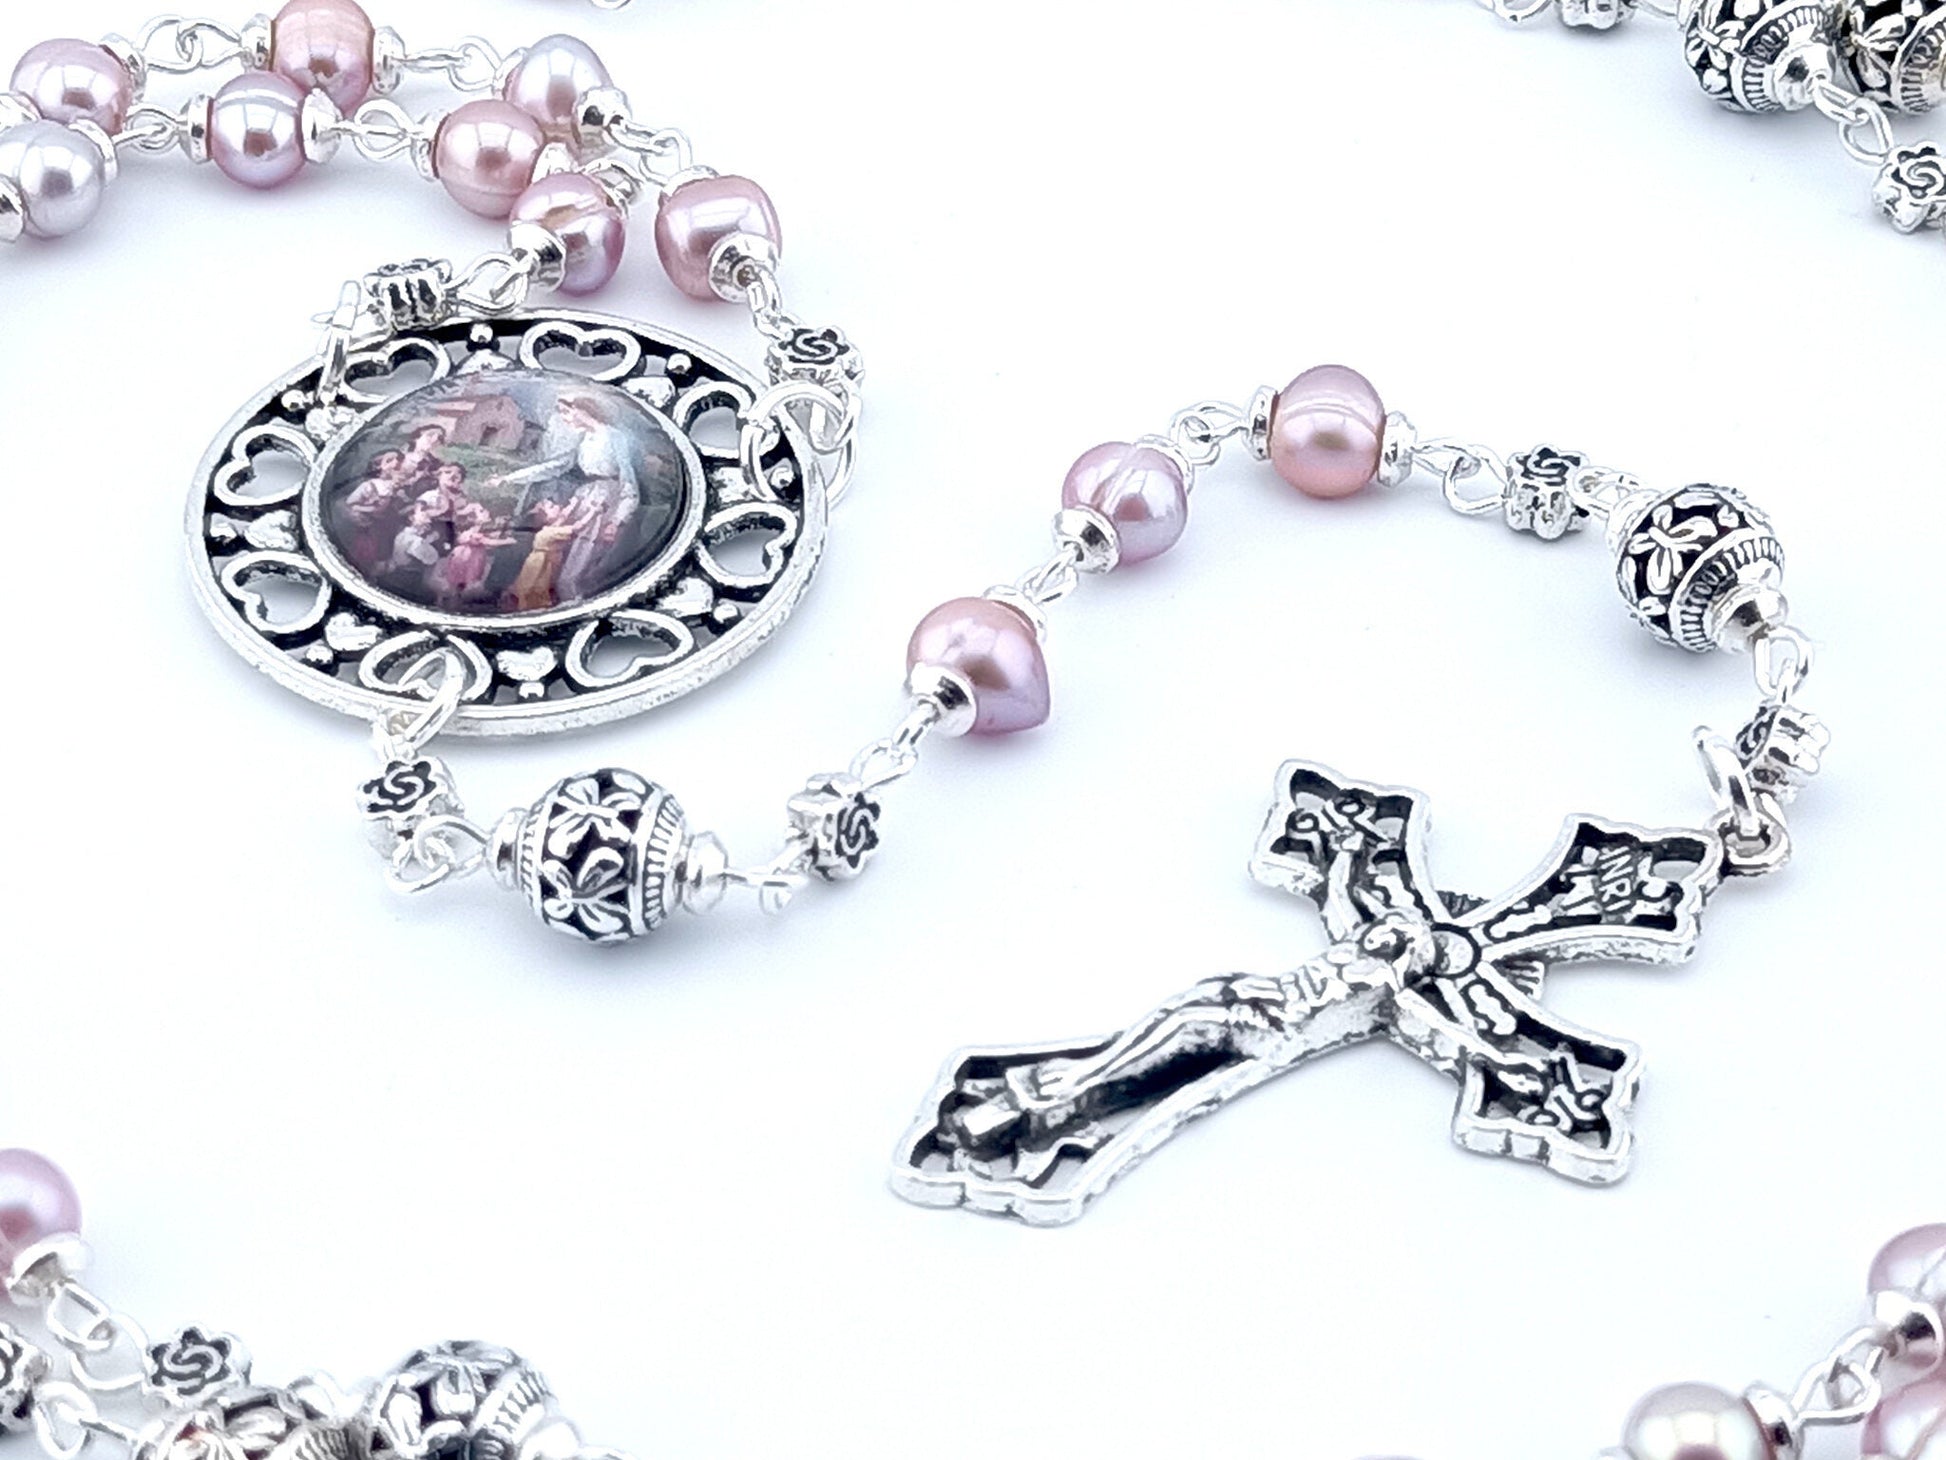 Virgin Mary and children unique rosary beads with pink fresh water pearl beads, silver pater beads, crucifix and picture centre medal.